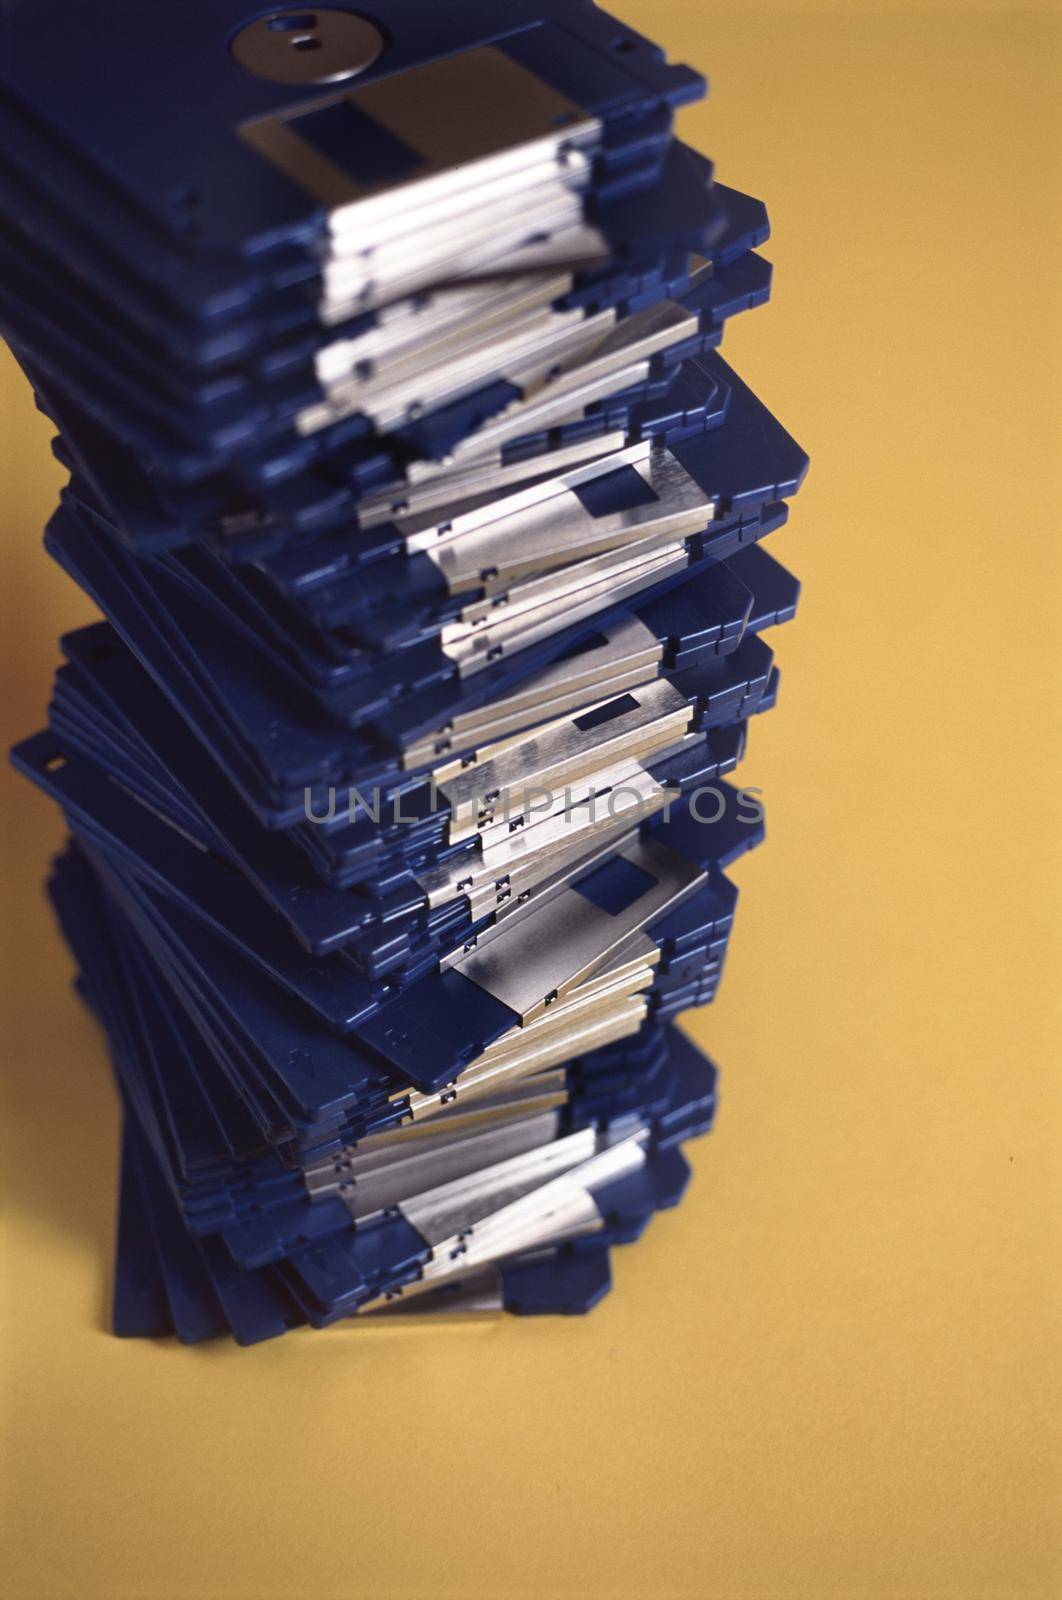 a stack of floppy disks, out of date data storage